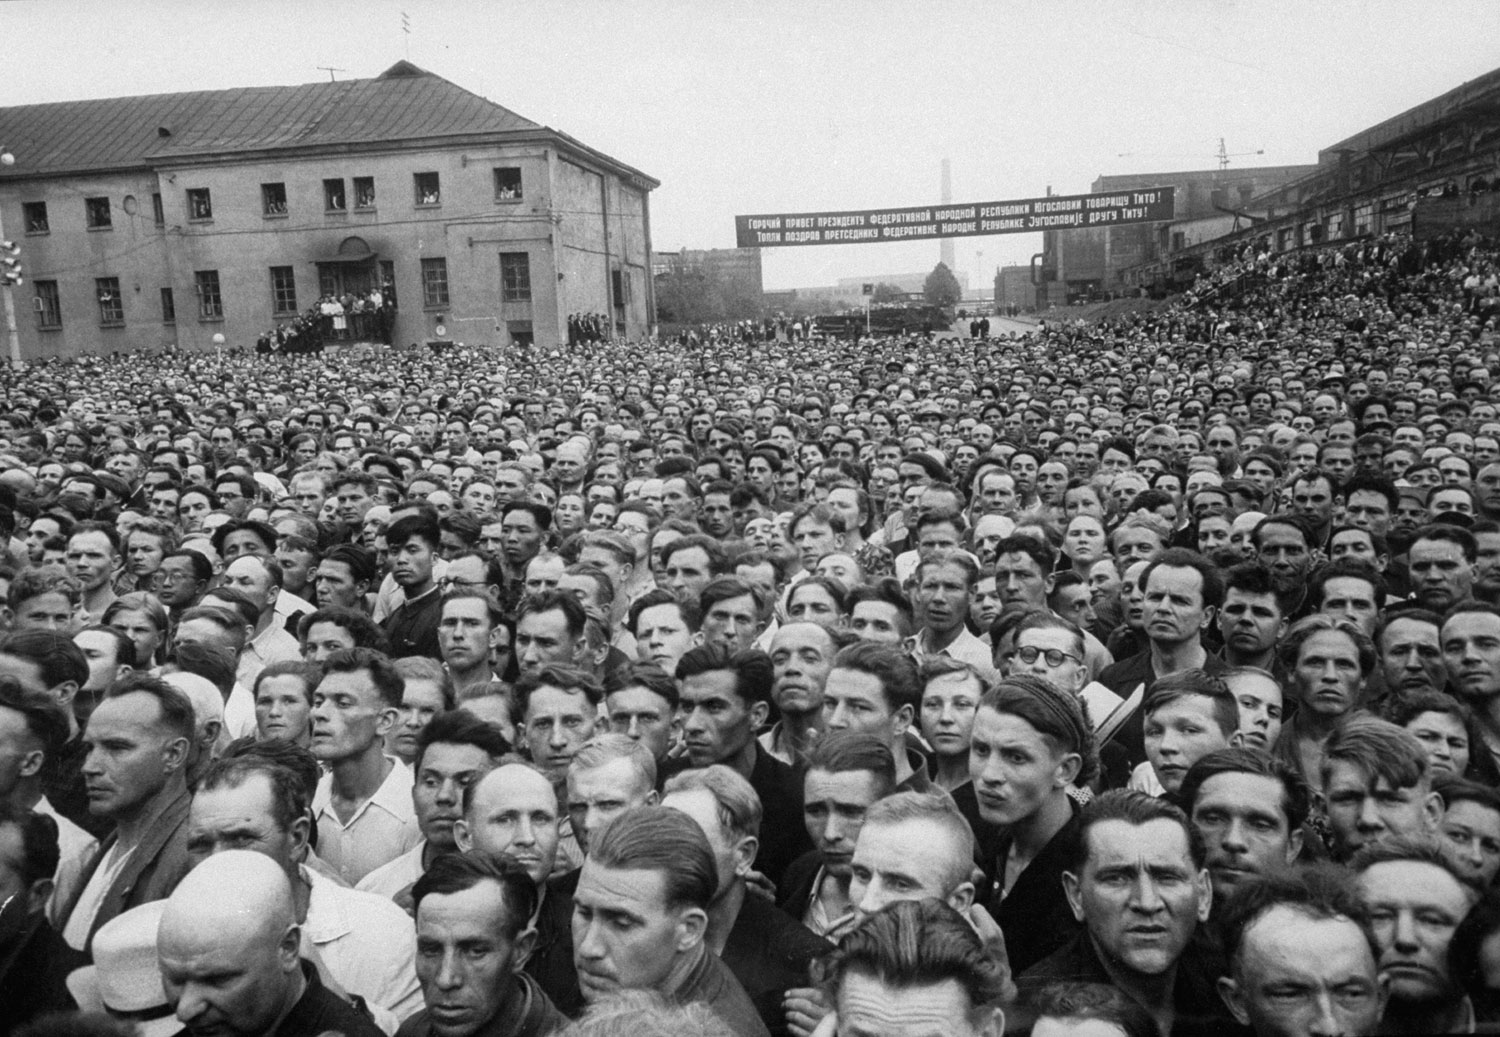 A large crowd gathers to welcome Yugoslav leader Tito during his visit to Russia, 1956.